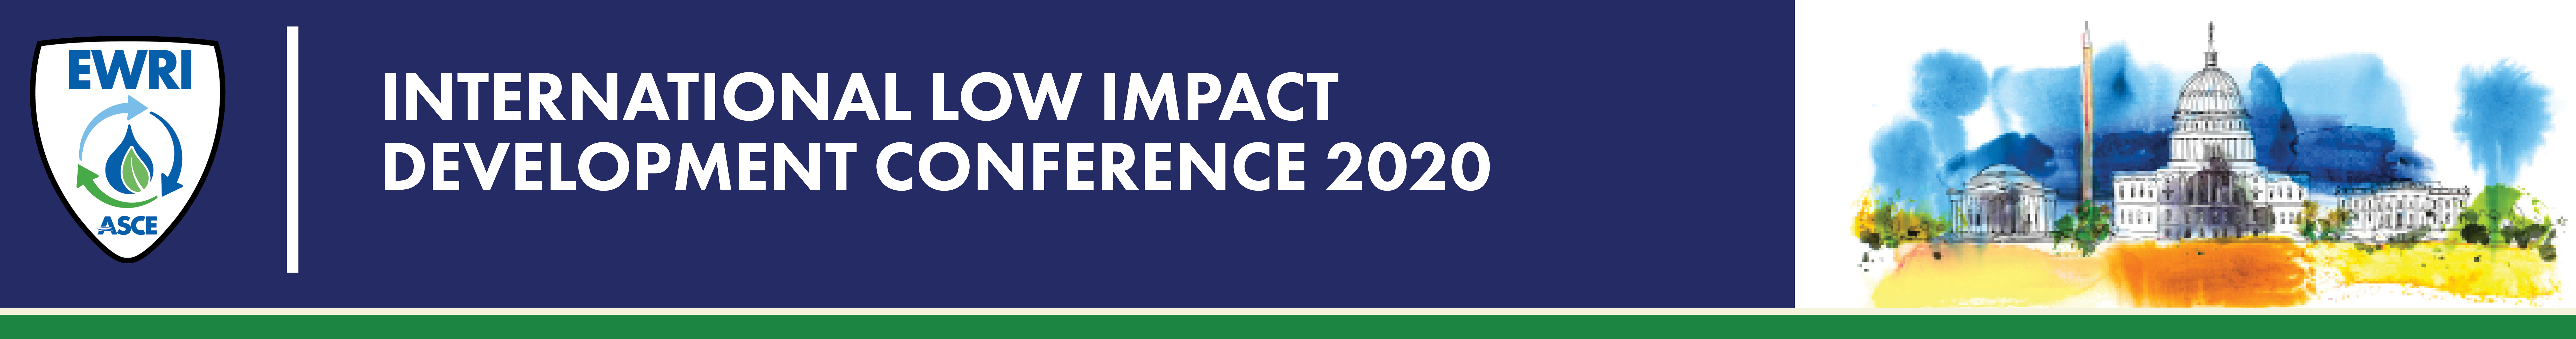 The banner to welcome you to International Low Impact Development Conference 2020